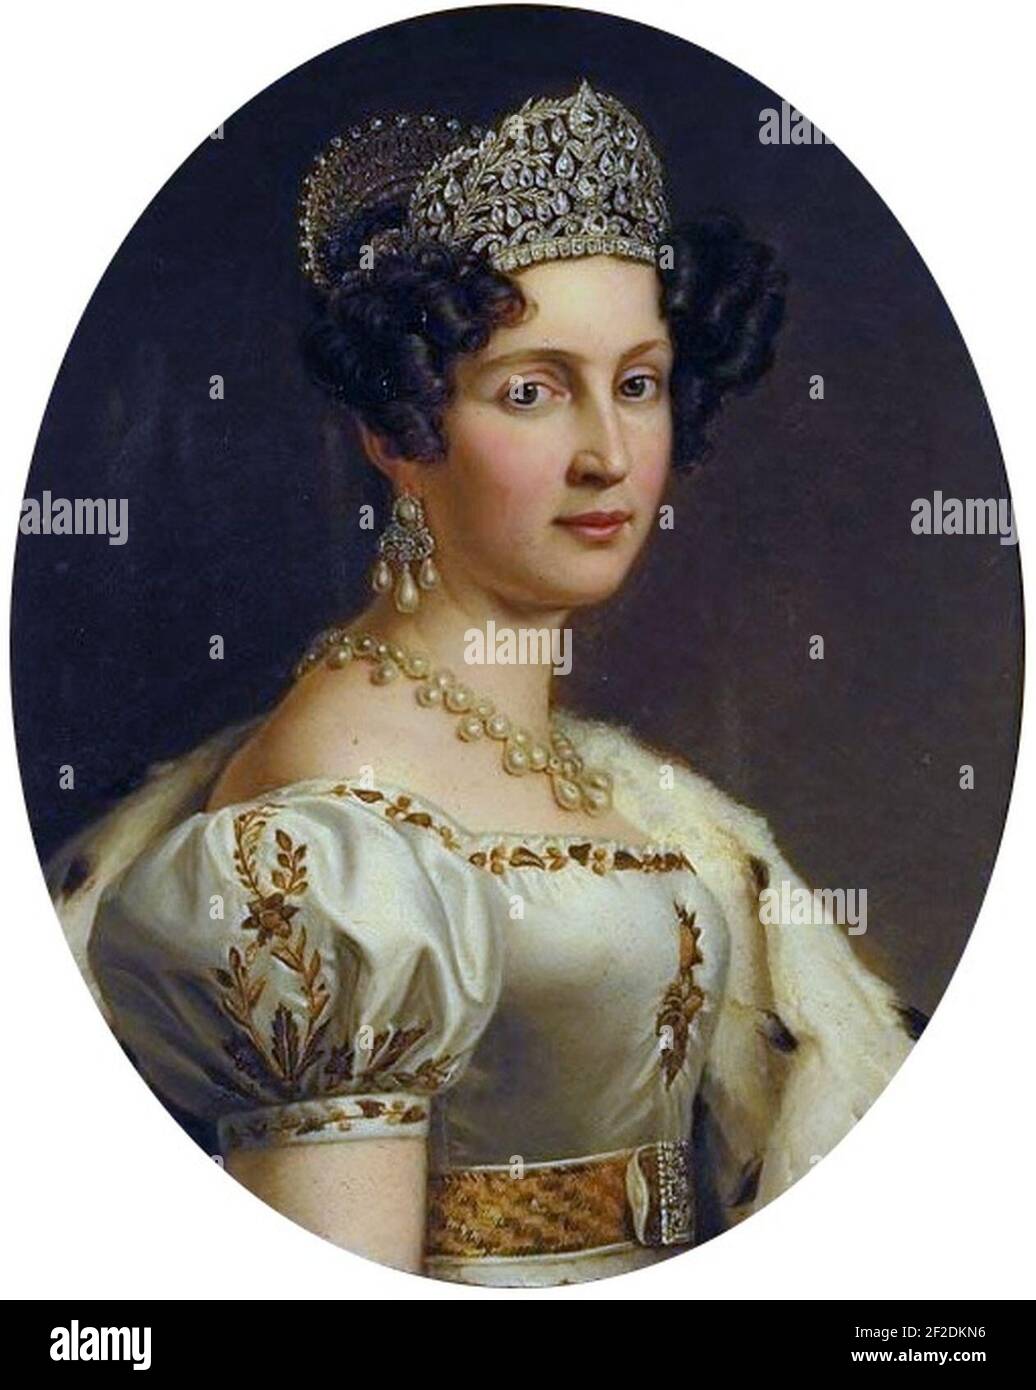 Portrait of Therese Queen of Bavaria, princess of Saxe-Hildburghausen. Stock Photo